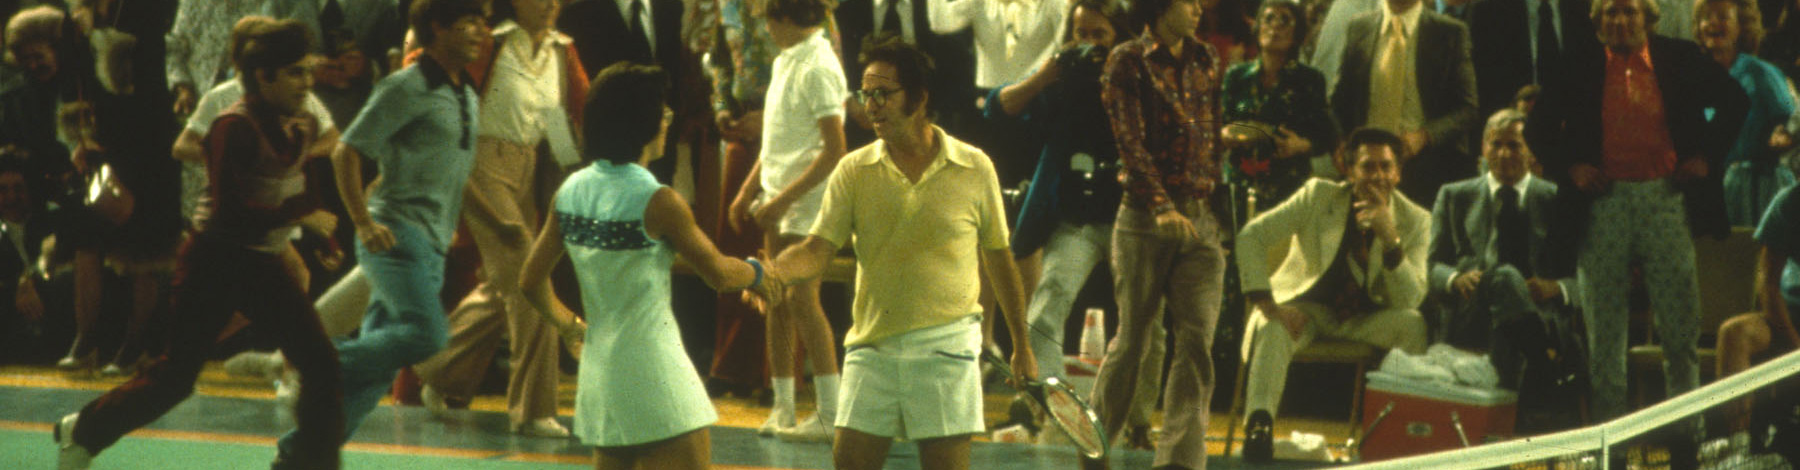 Film Discussion Guide: Battle of the Sexes - Women's Sports Foundation